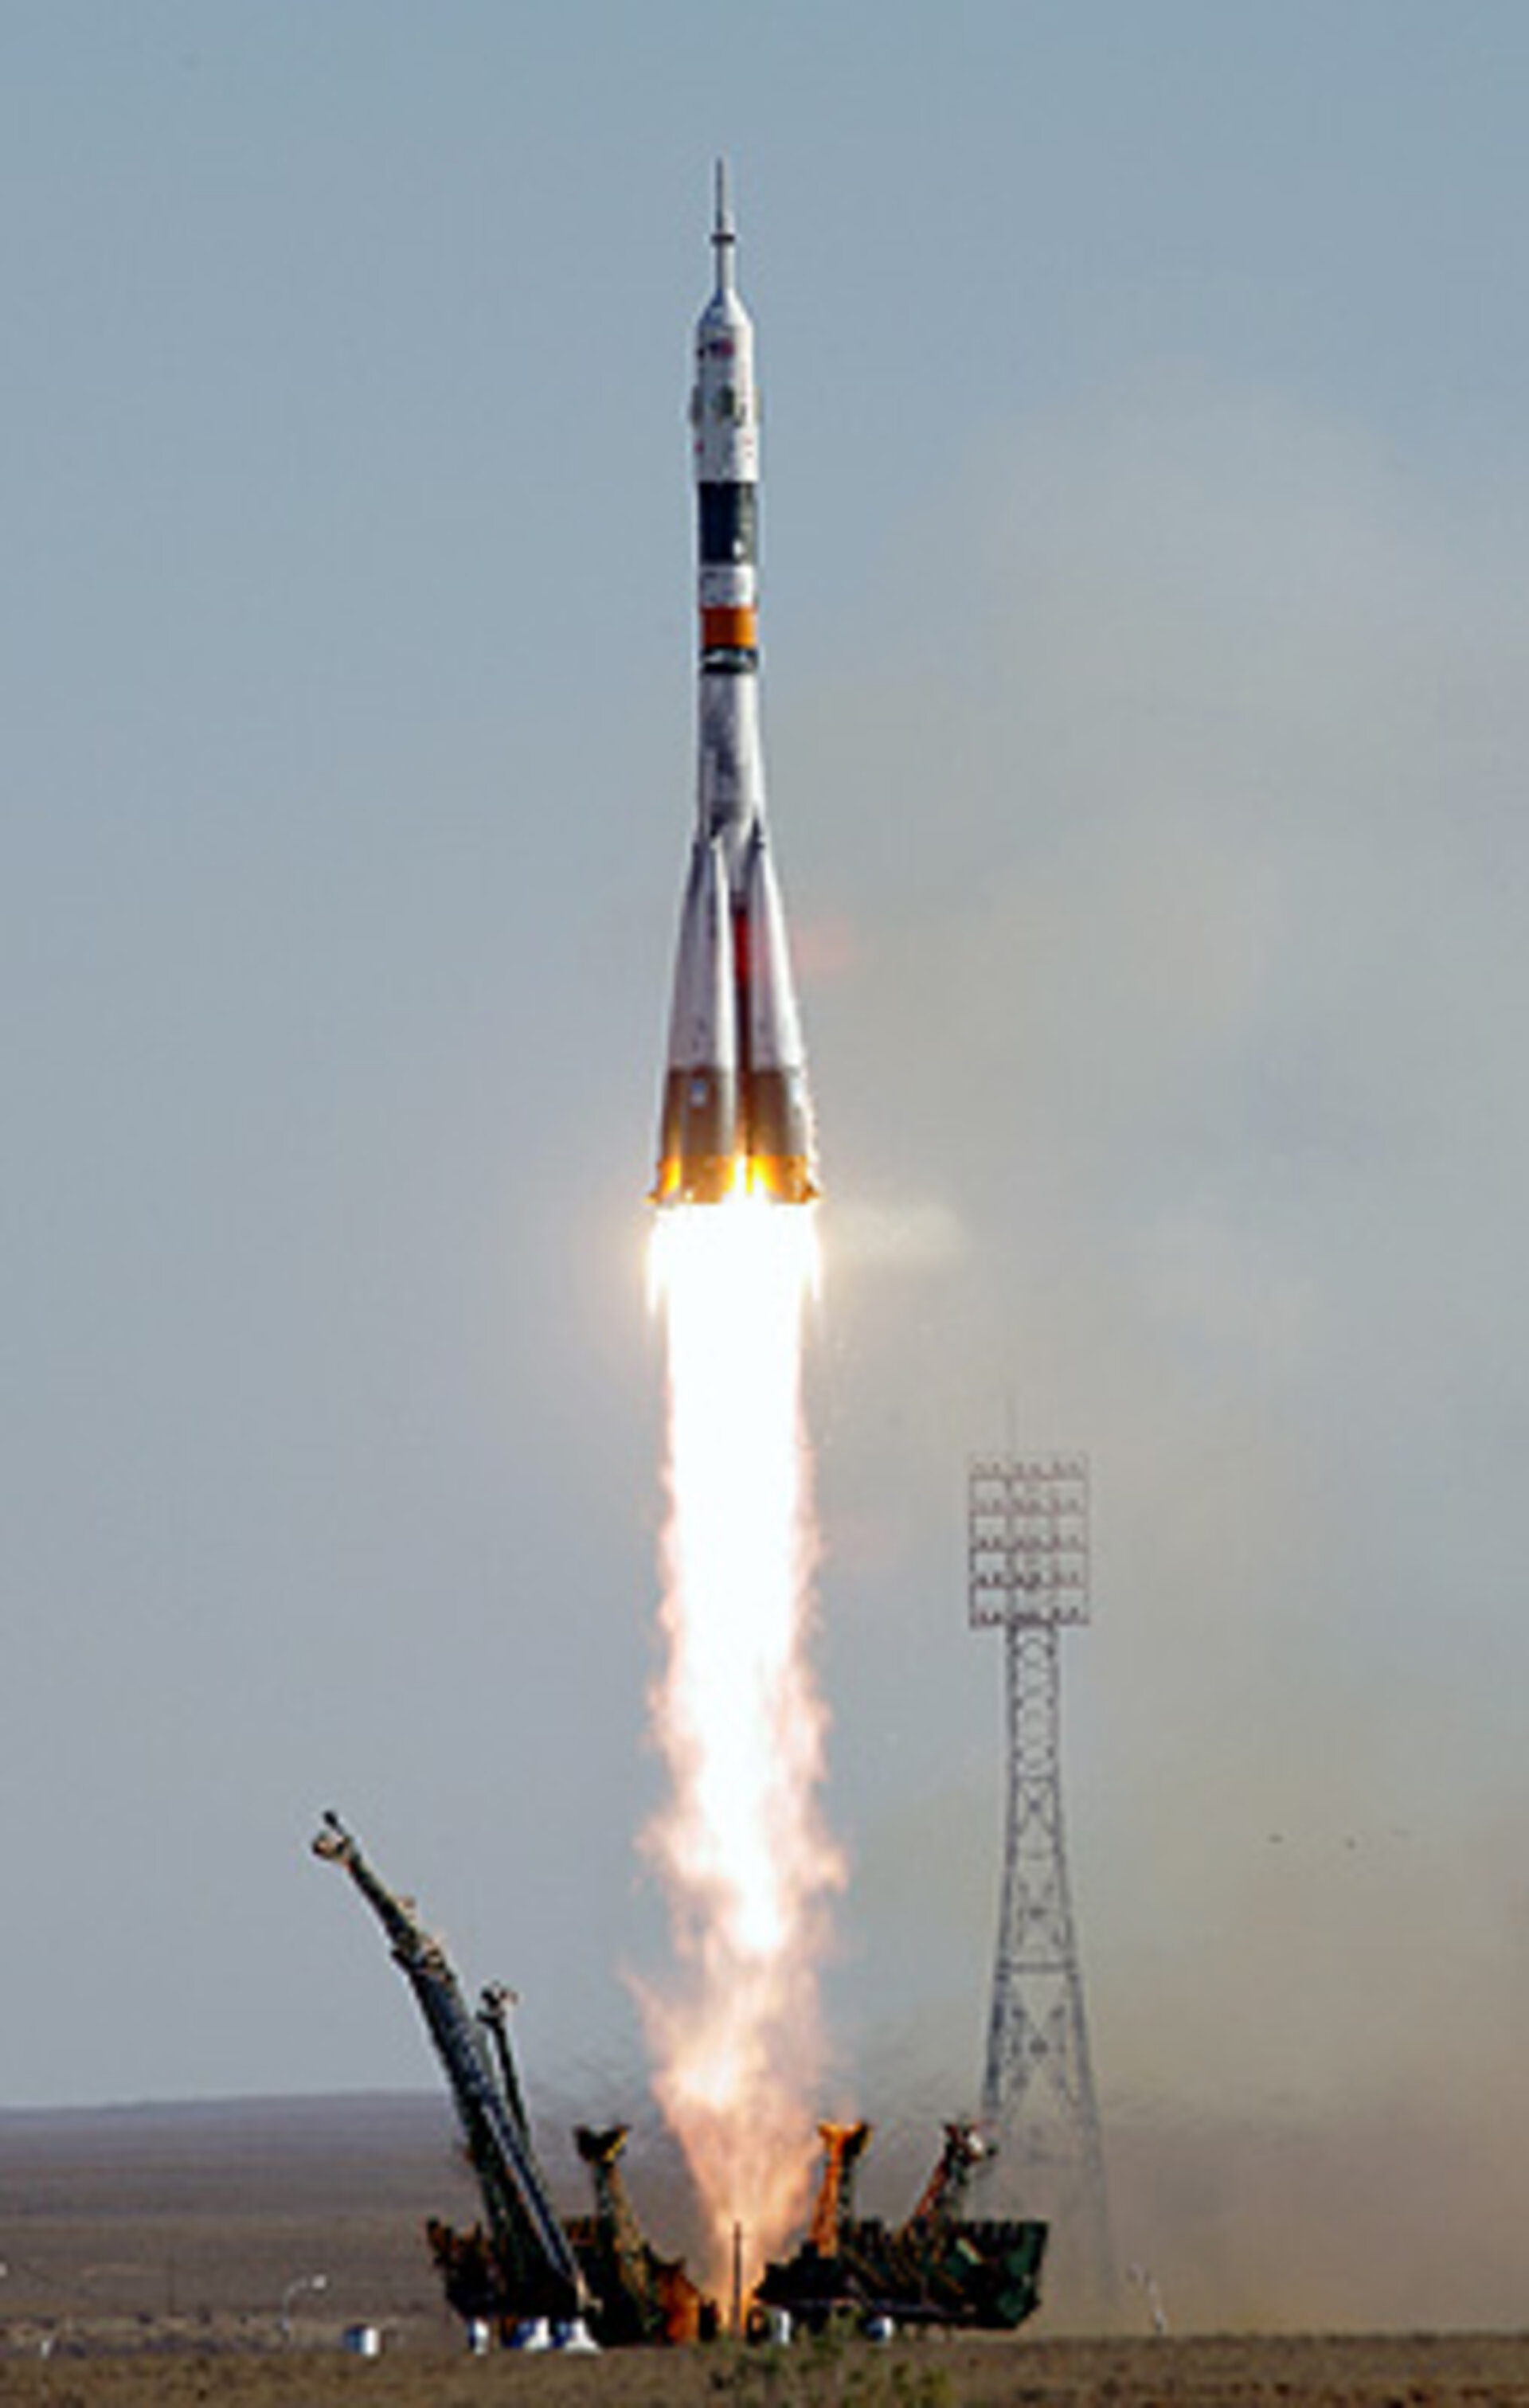 The Russian Soyuz TMA-9 rocket carrying the world's first female space tourist, Anoushen Ansari